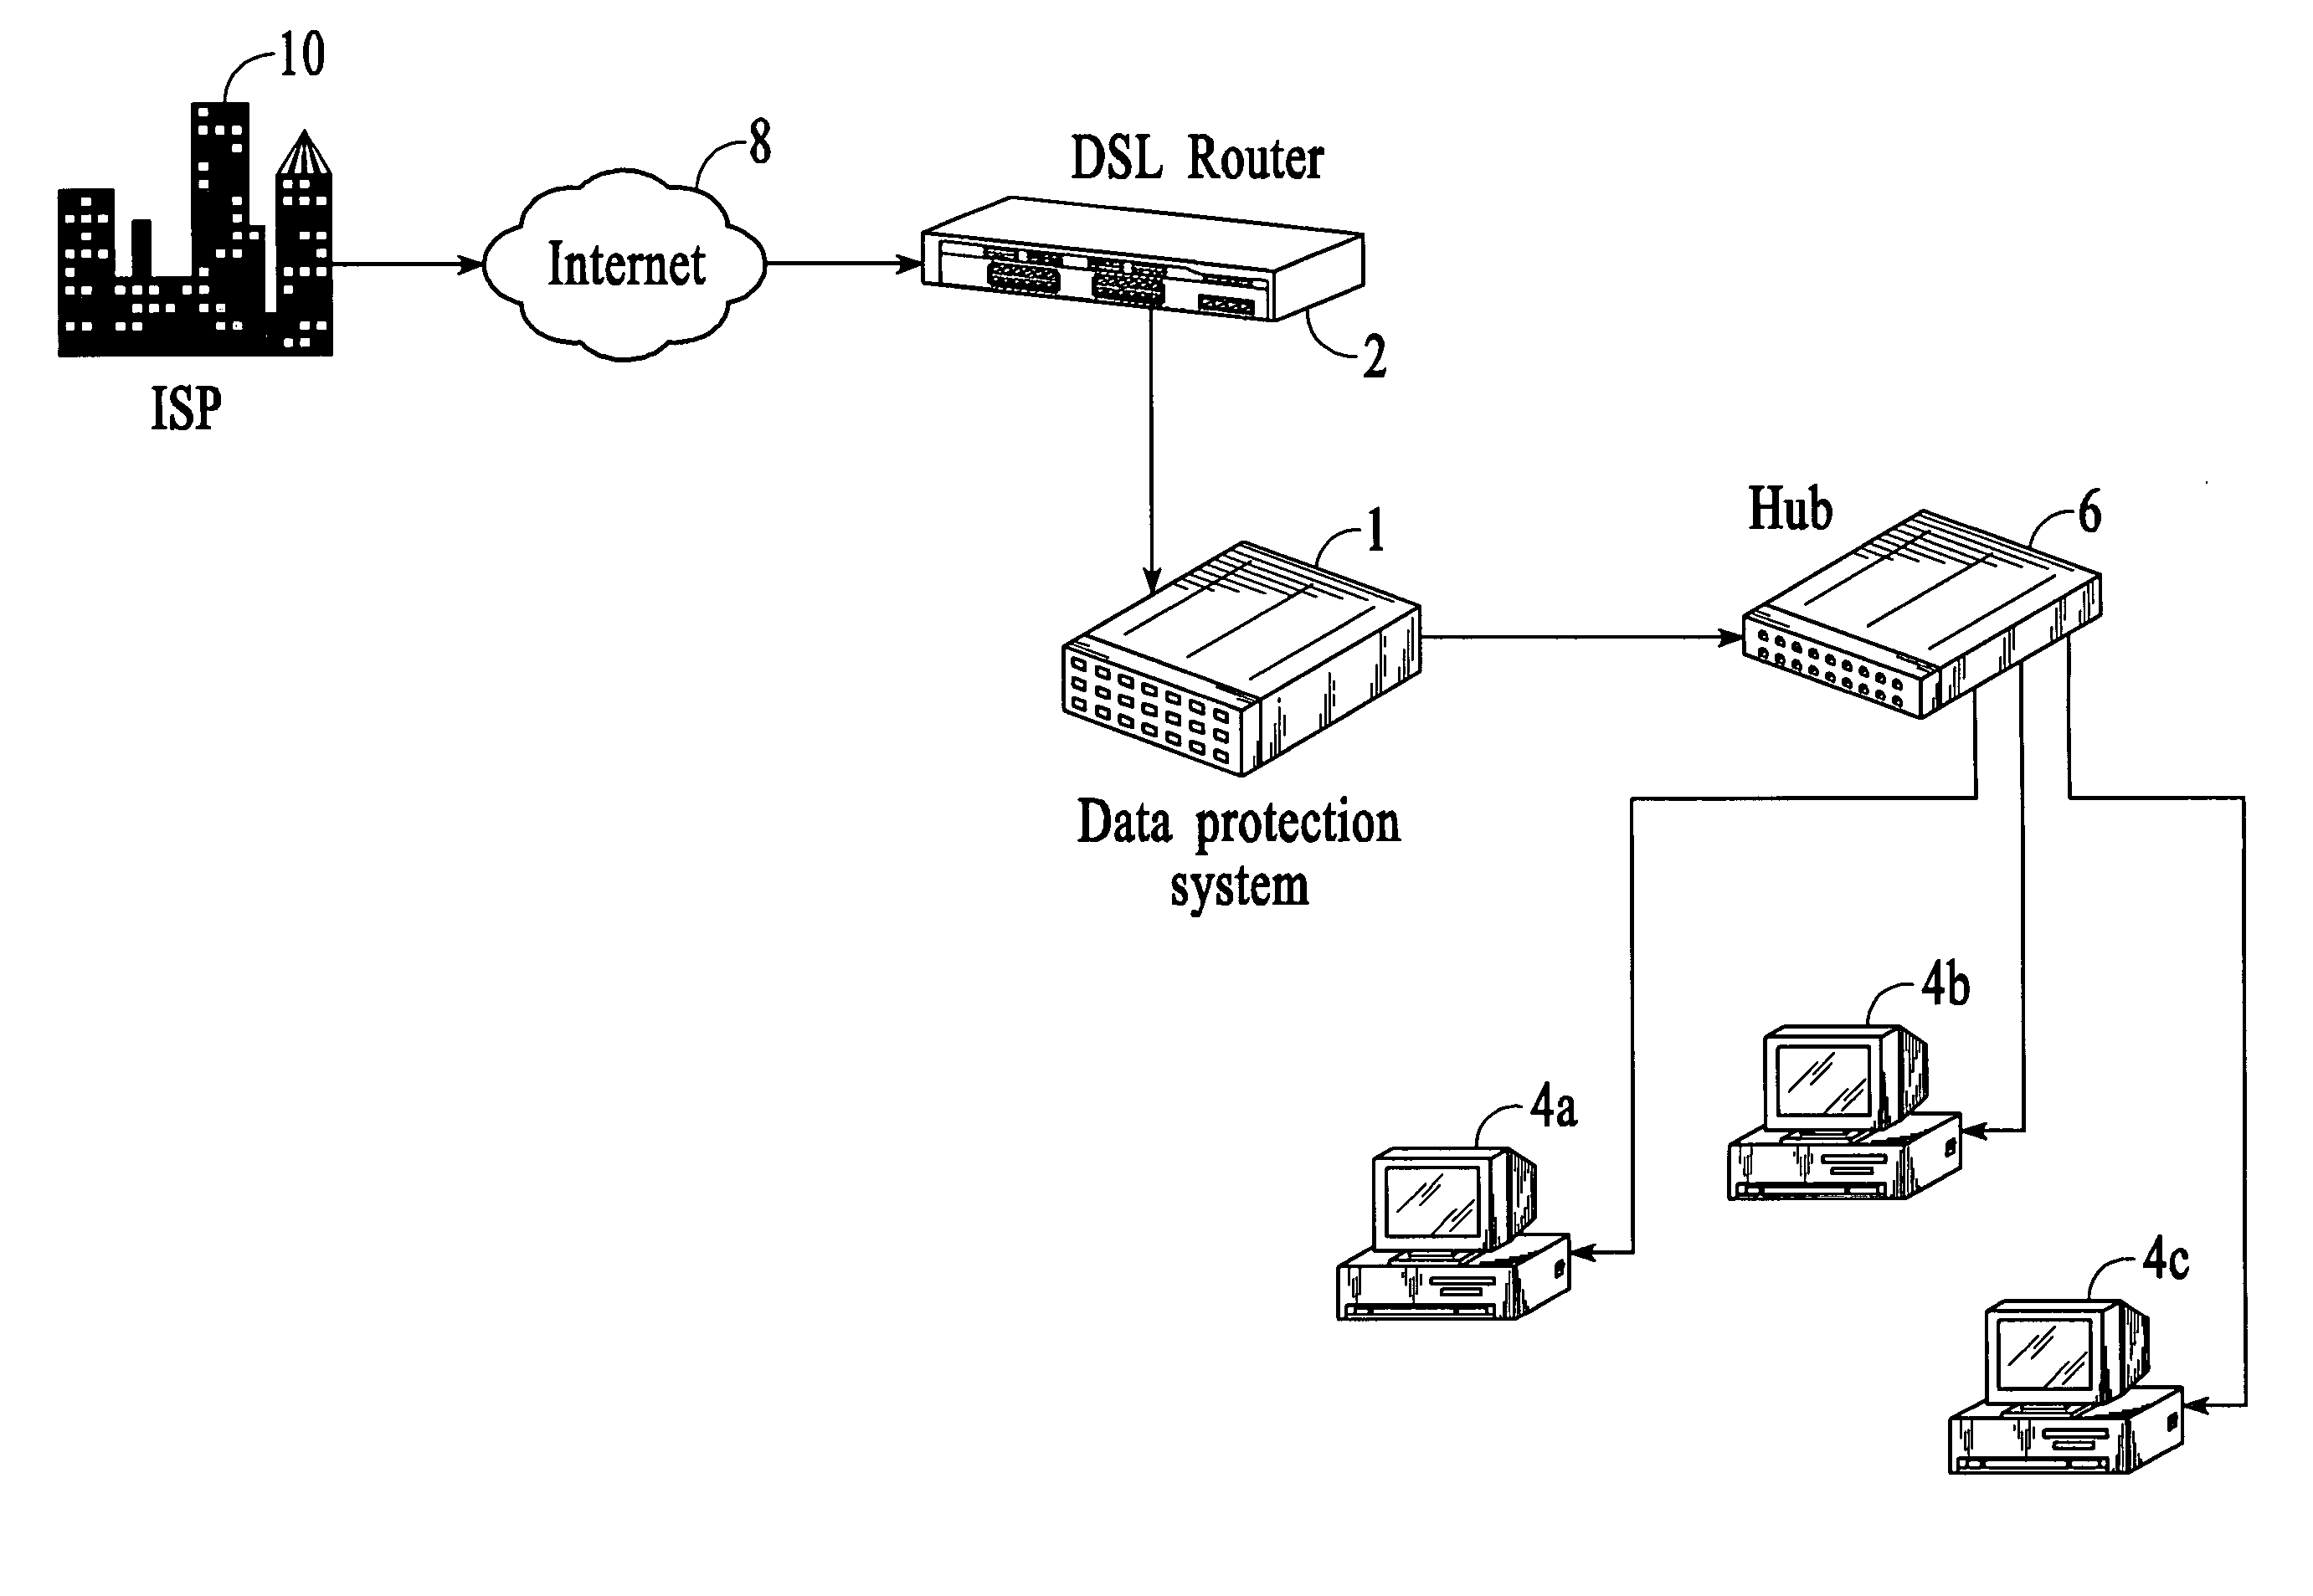 Real time firewall/data protection systems and methods